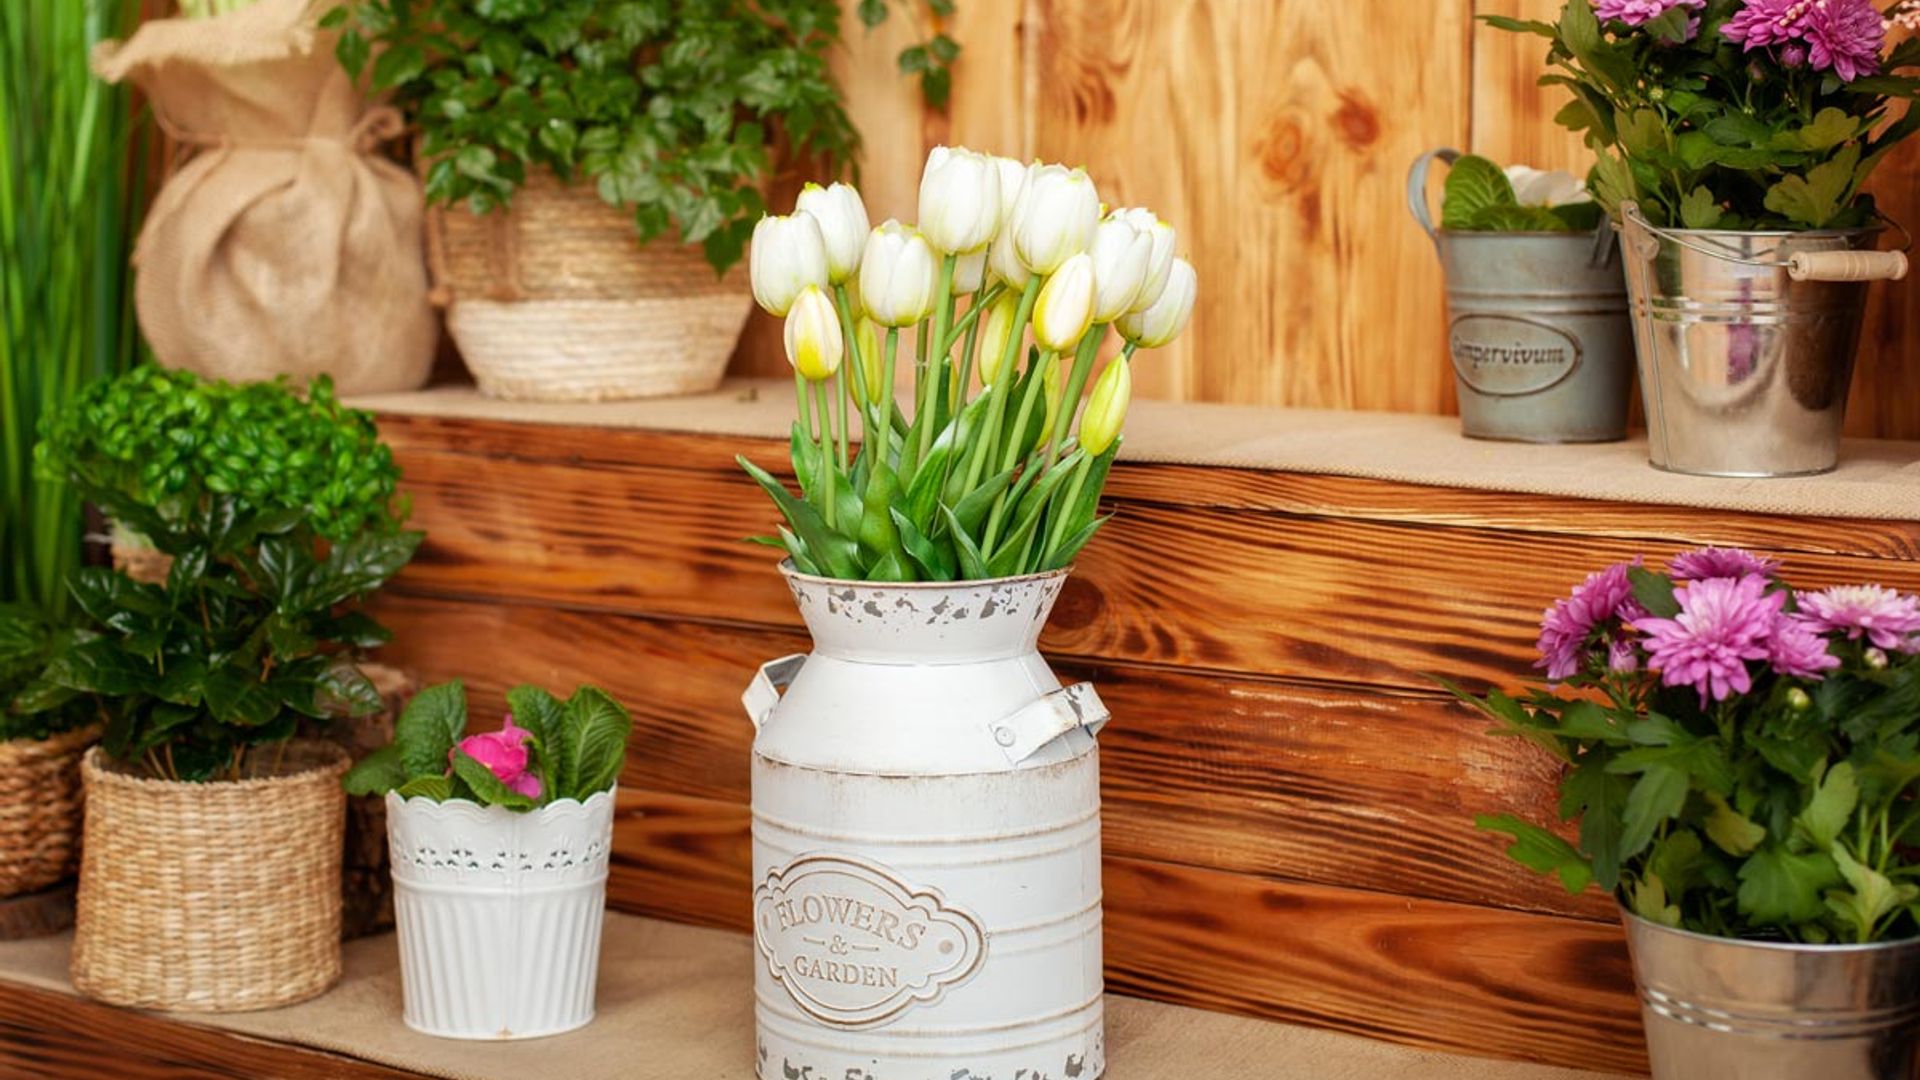 Lidl's chic wooden garden accessories are a Spring must-have – just ask shoppers